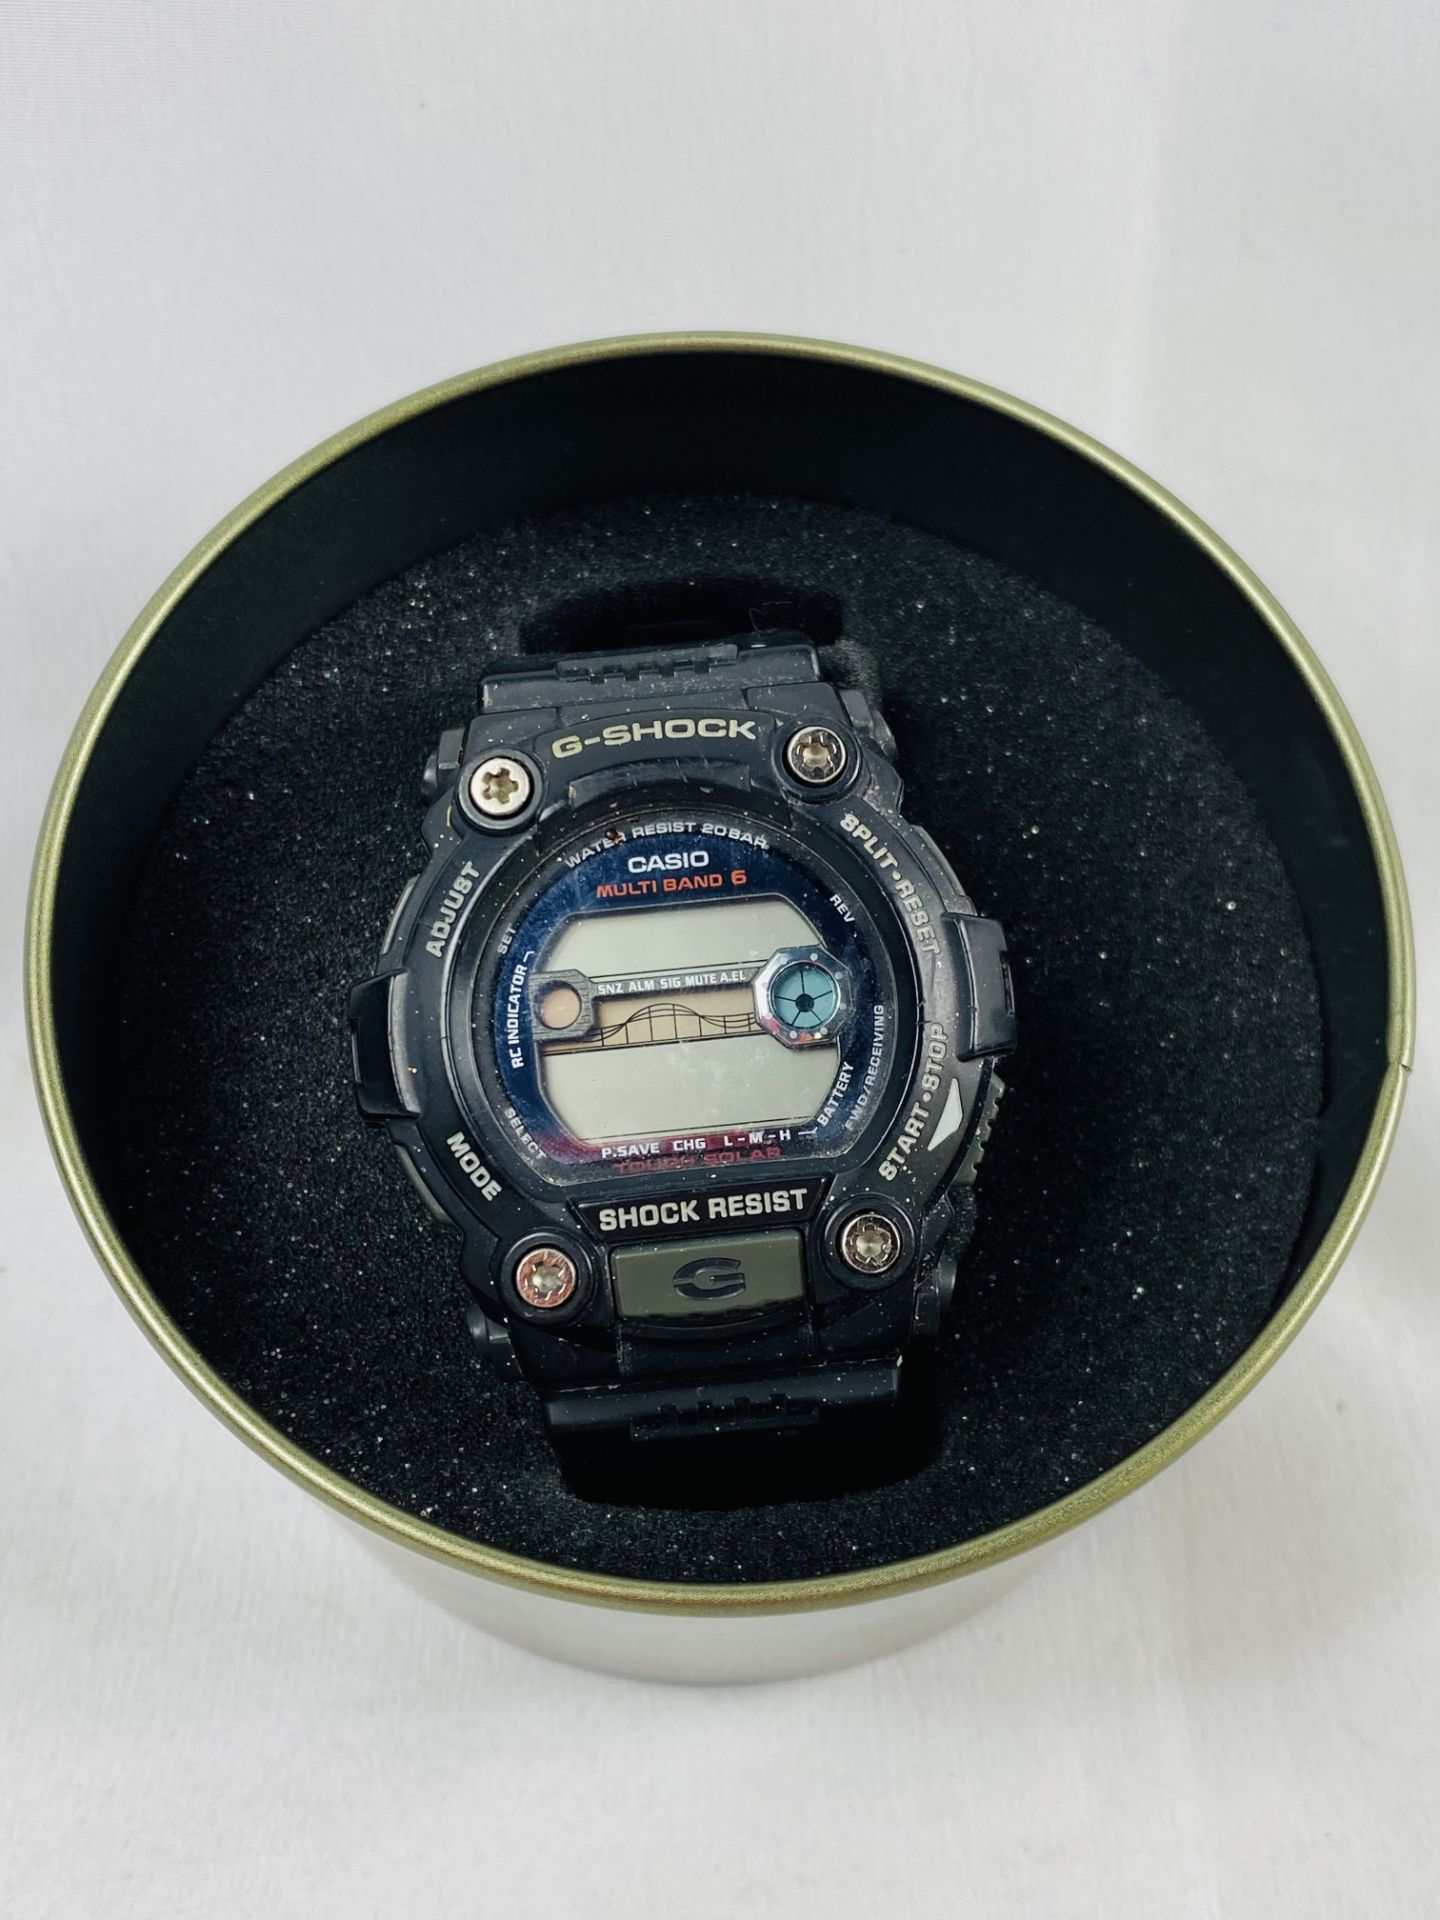 Casio G Shock watch together with six other watches - Image 3 of 6